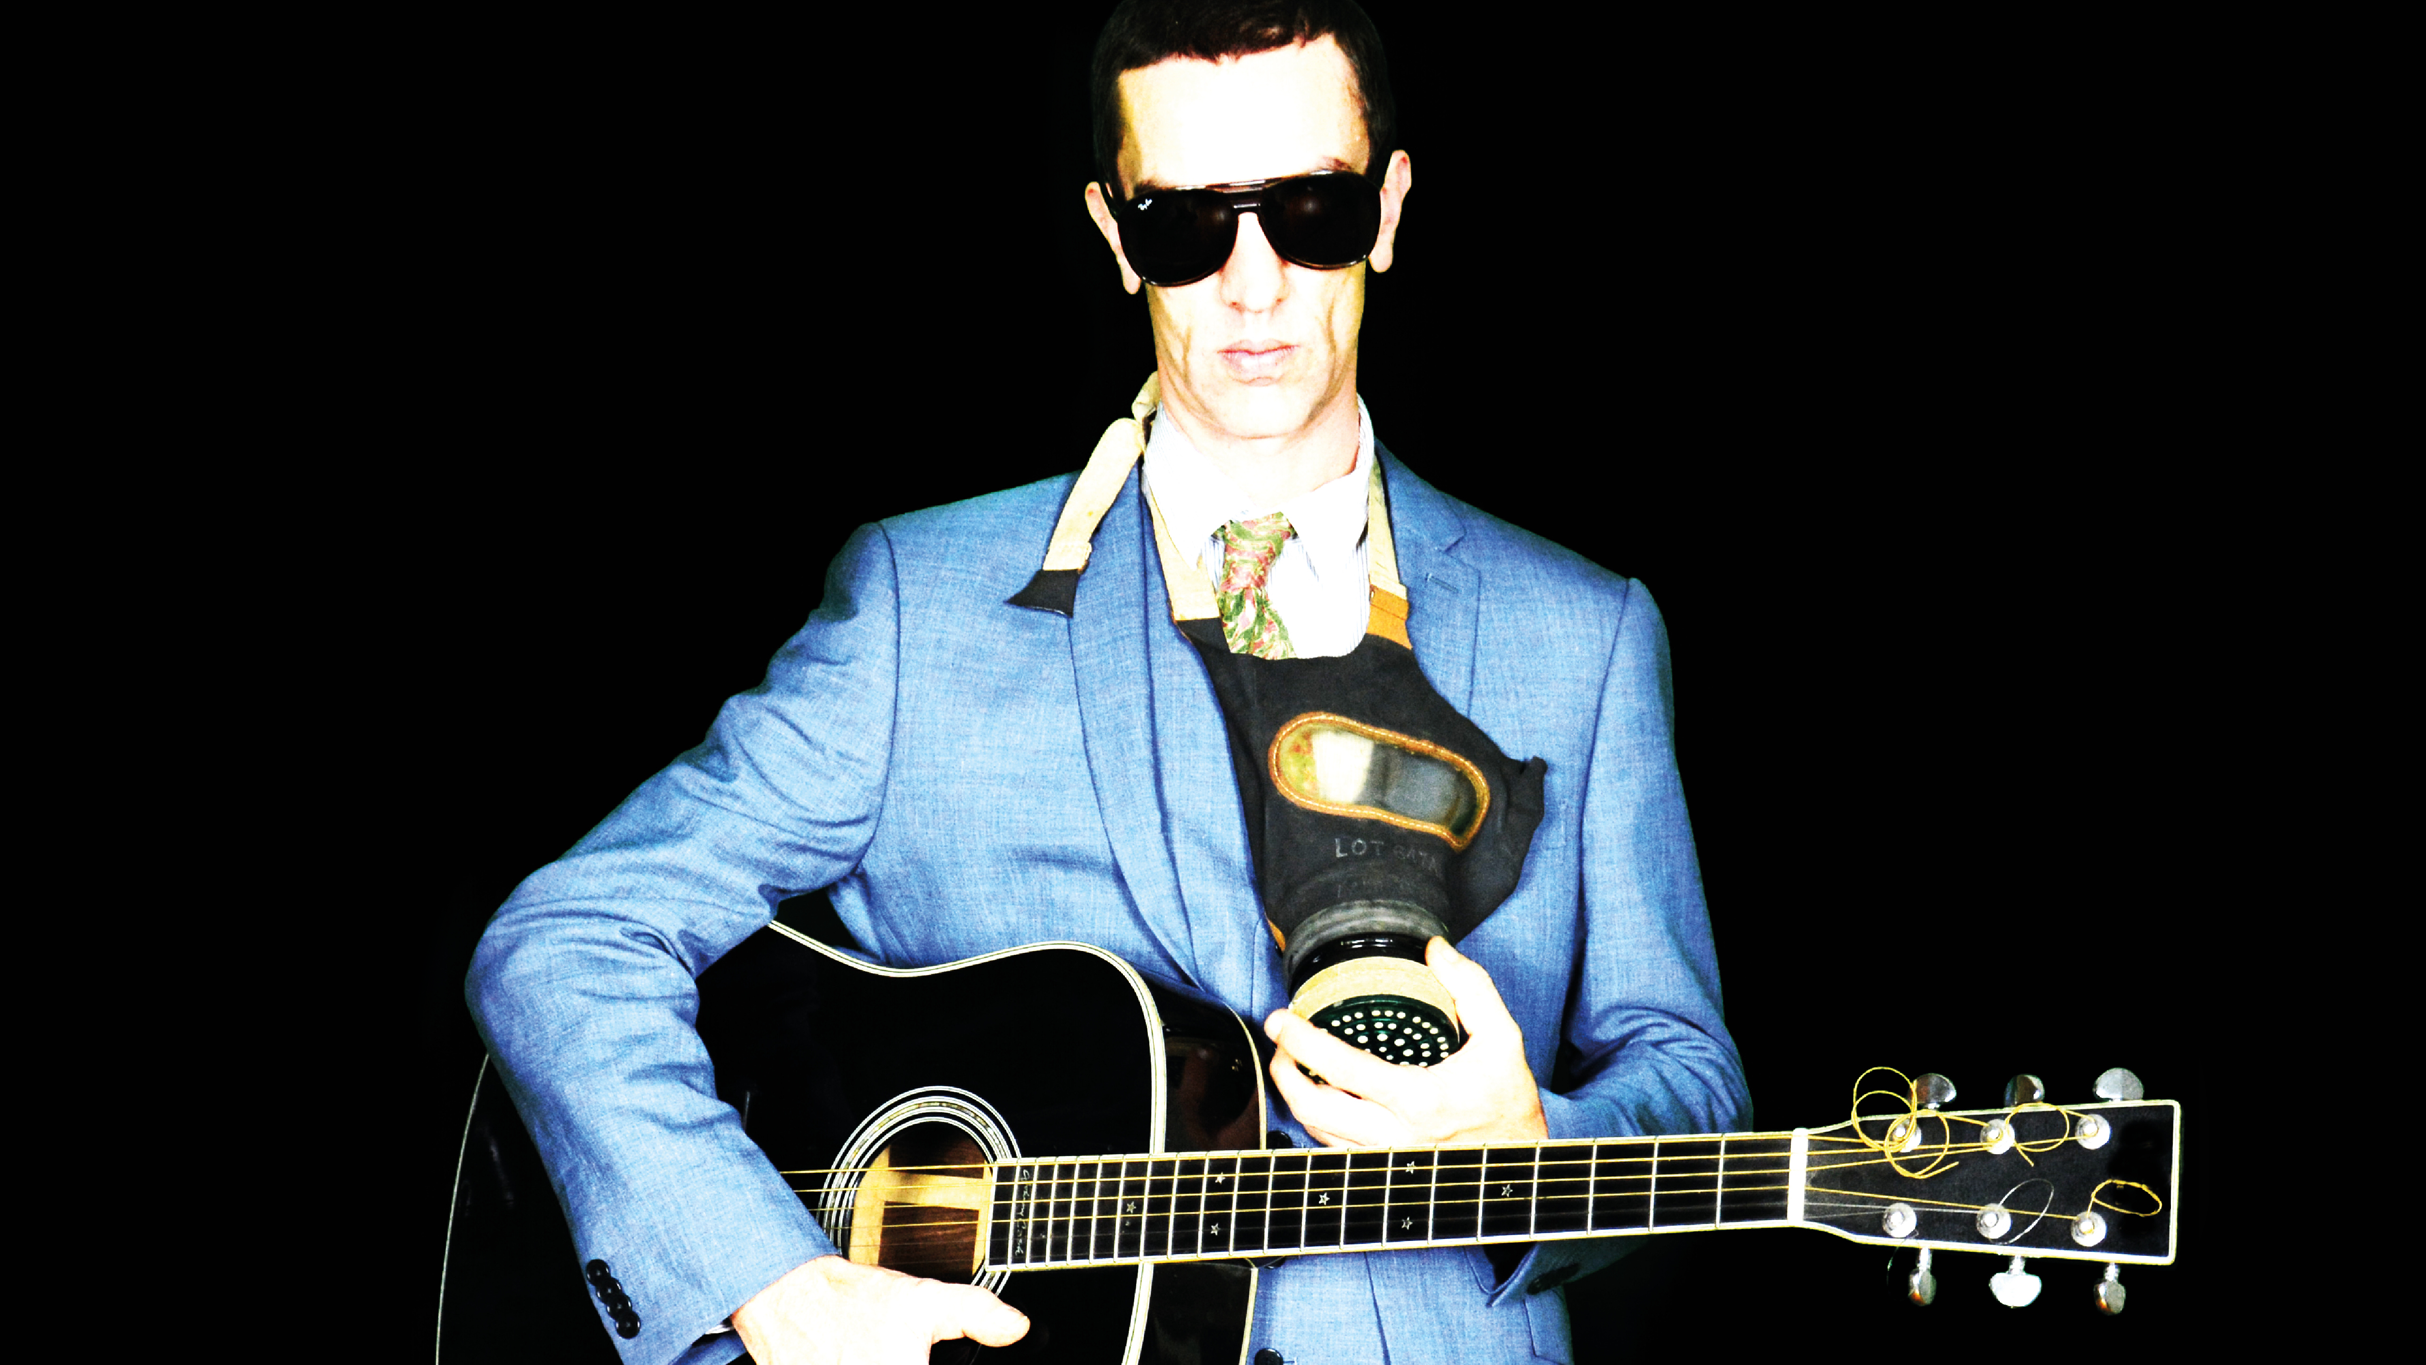 Richard Ashcroft  - Dalby Forest in Yorkshire promo photo for Priority from O2 presale offer code